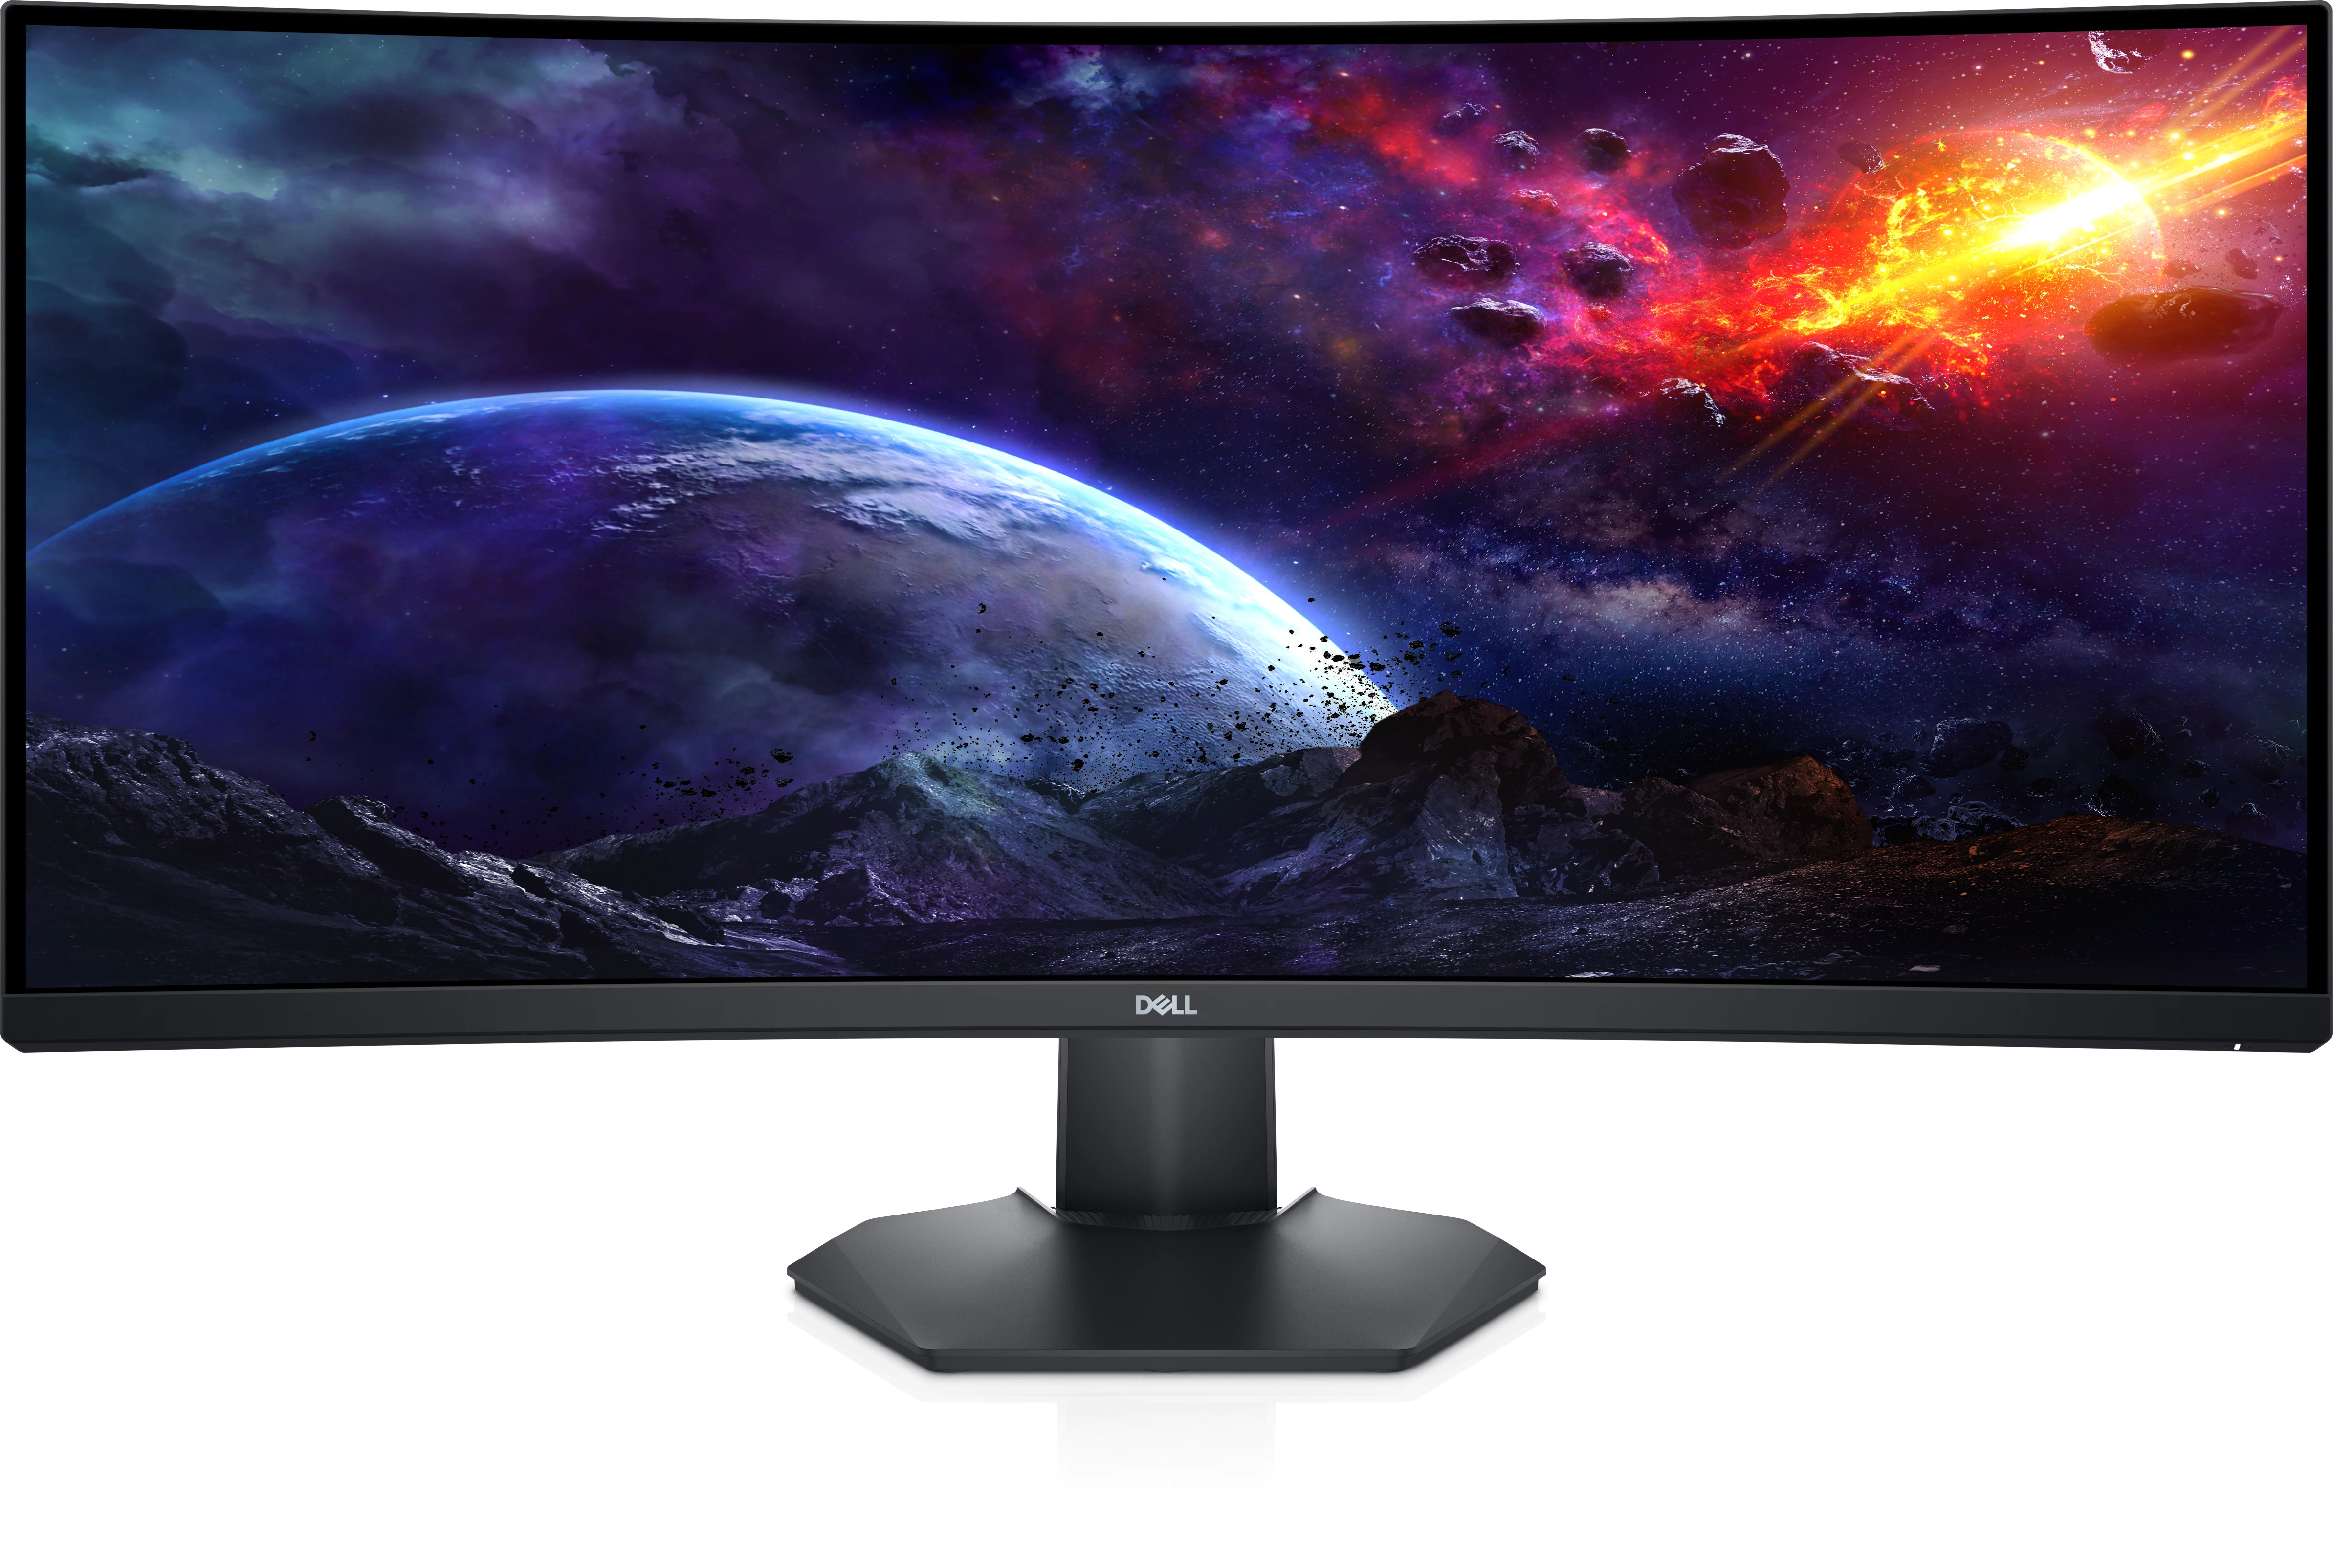 Dell 34" Curved Gaming Monitor (S3422DWG) - $449.99